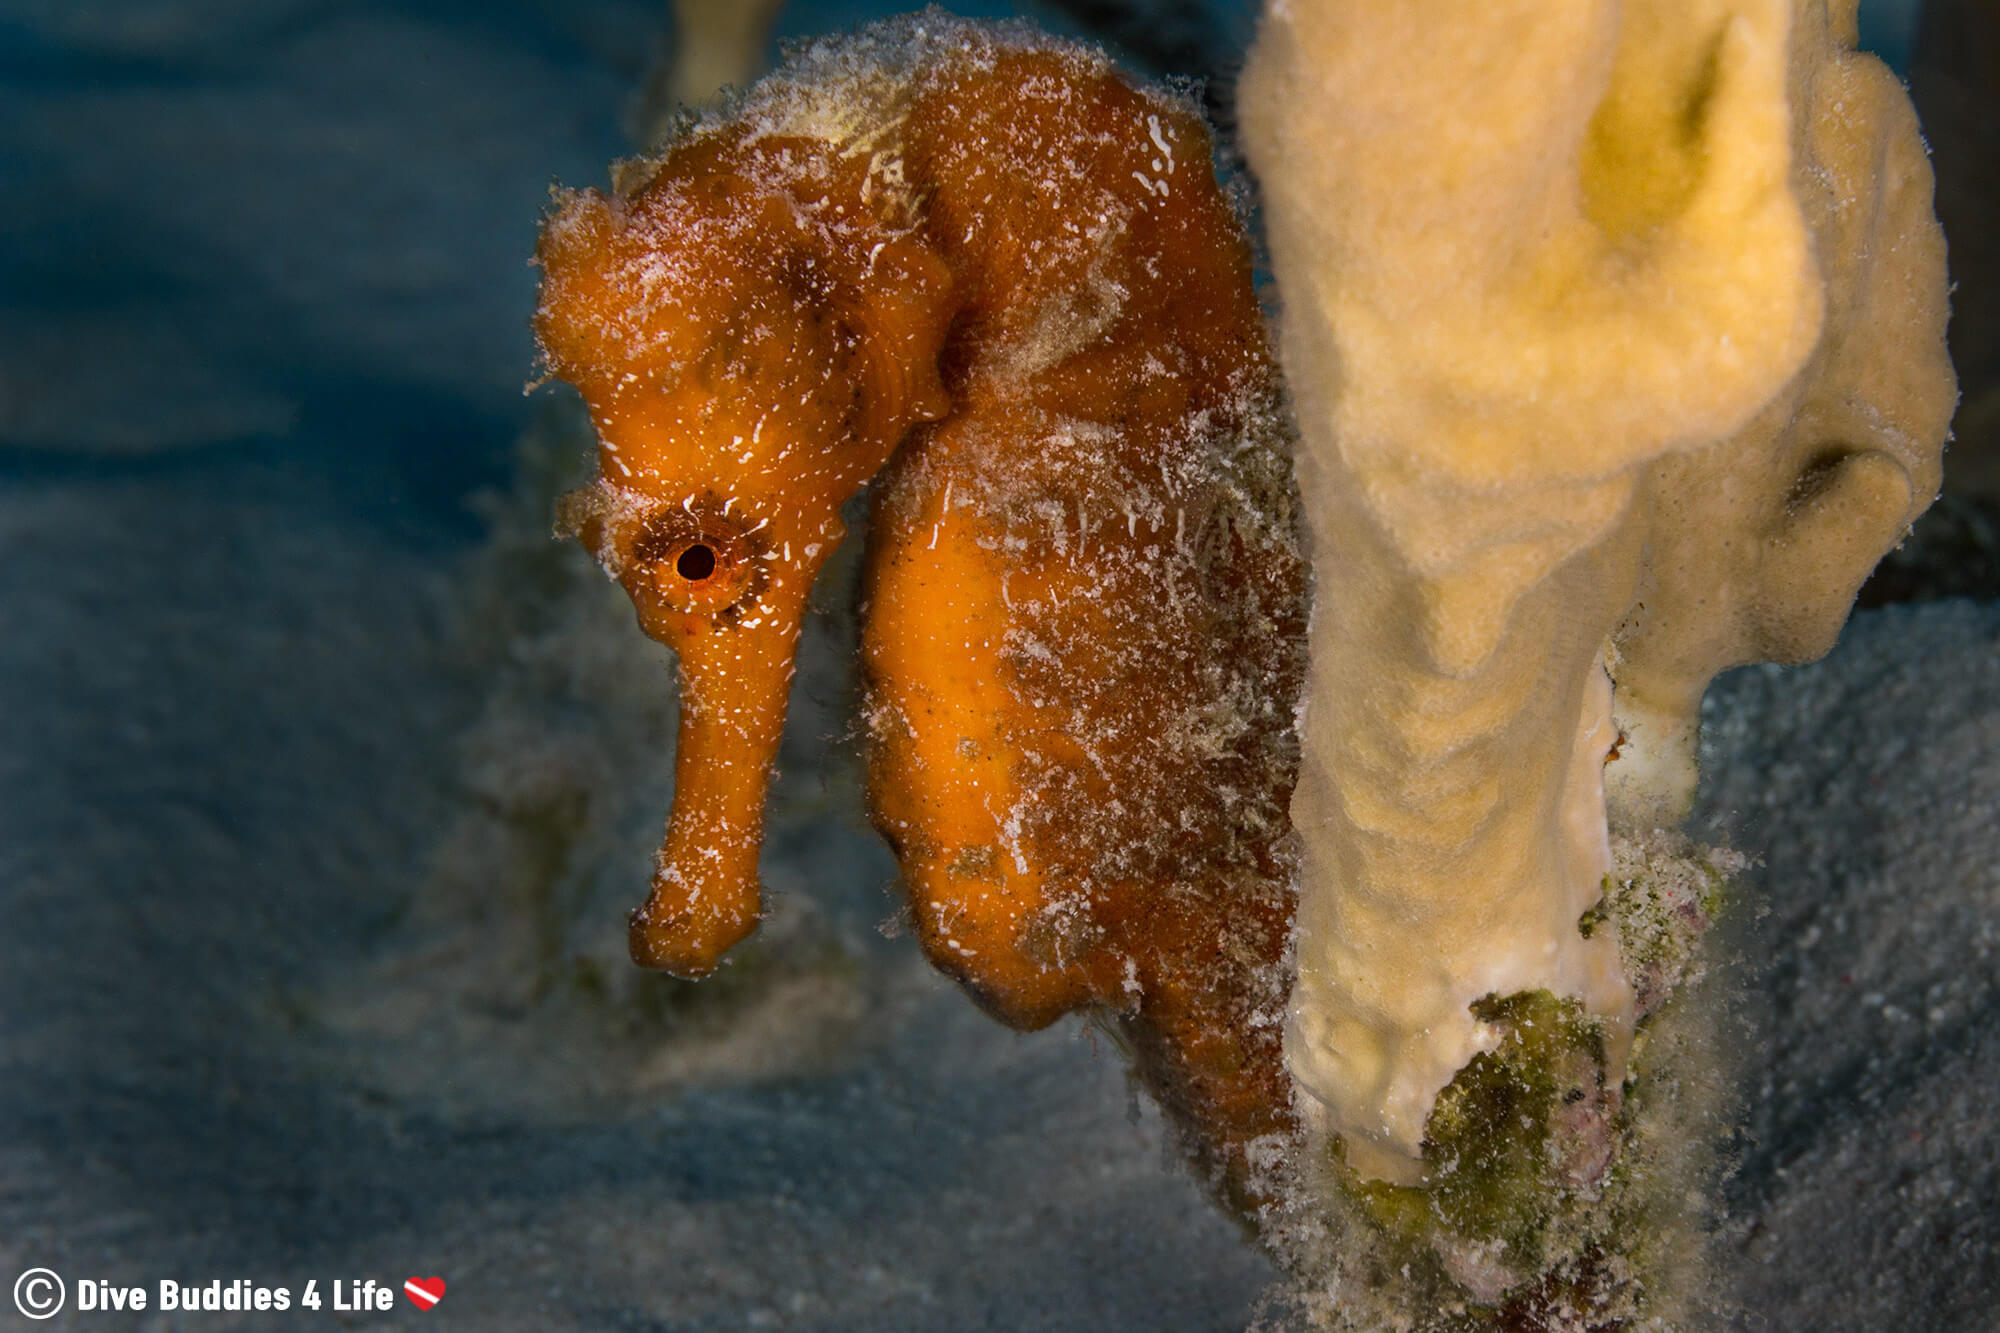 An Orange Seahorse On A Piece Of Fire Coral In Bonaire, Dutch Caribbean